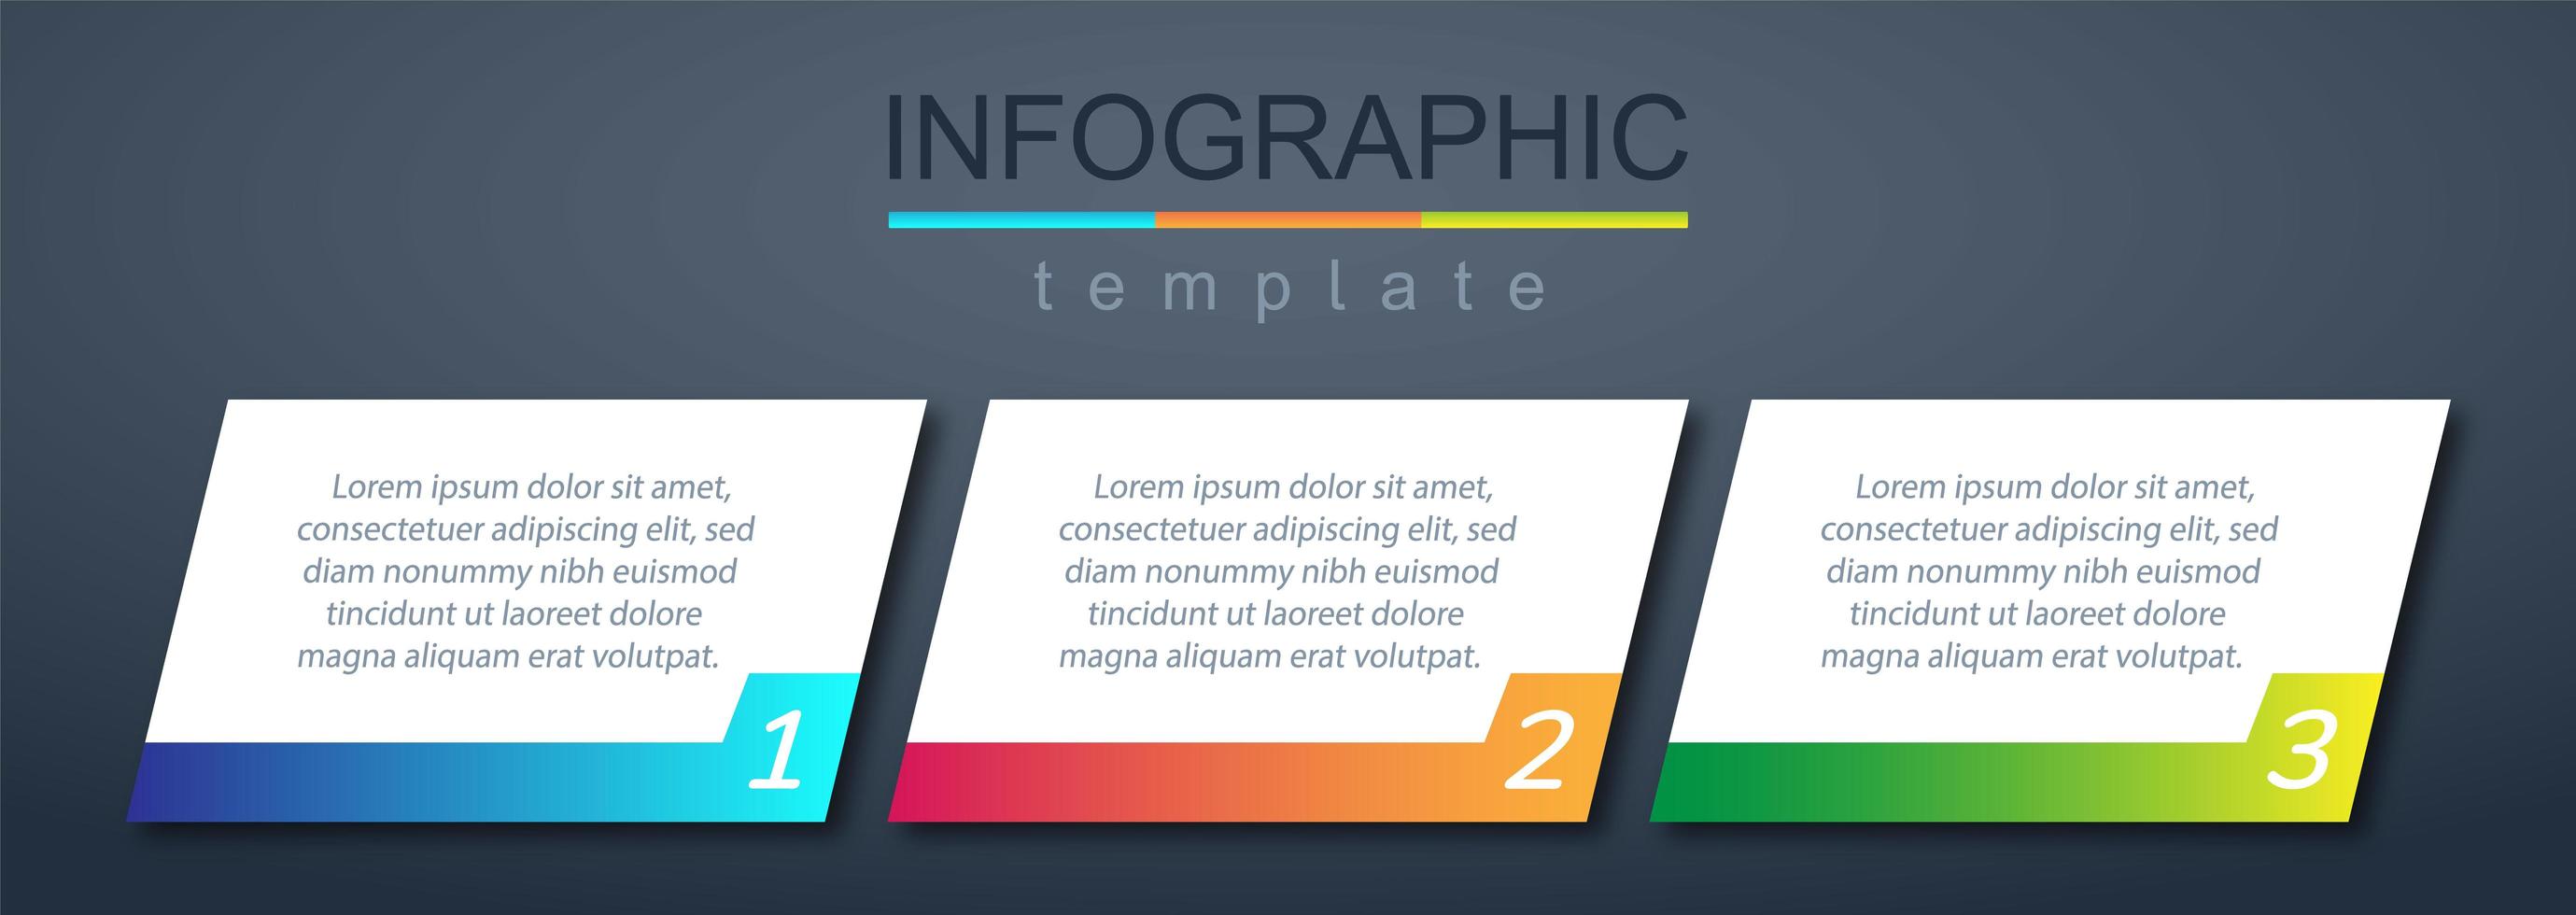 Modern infographic corporate and business banner template vector